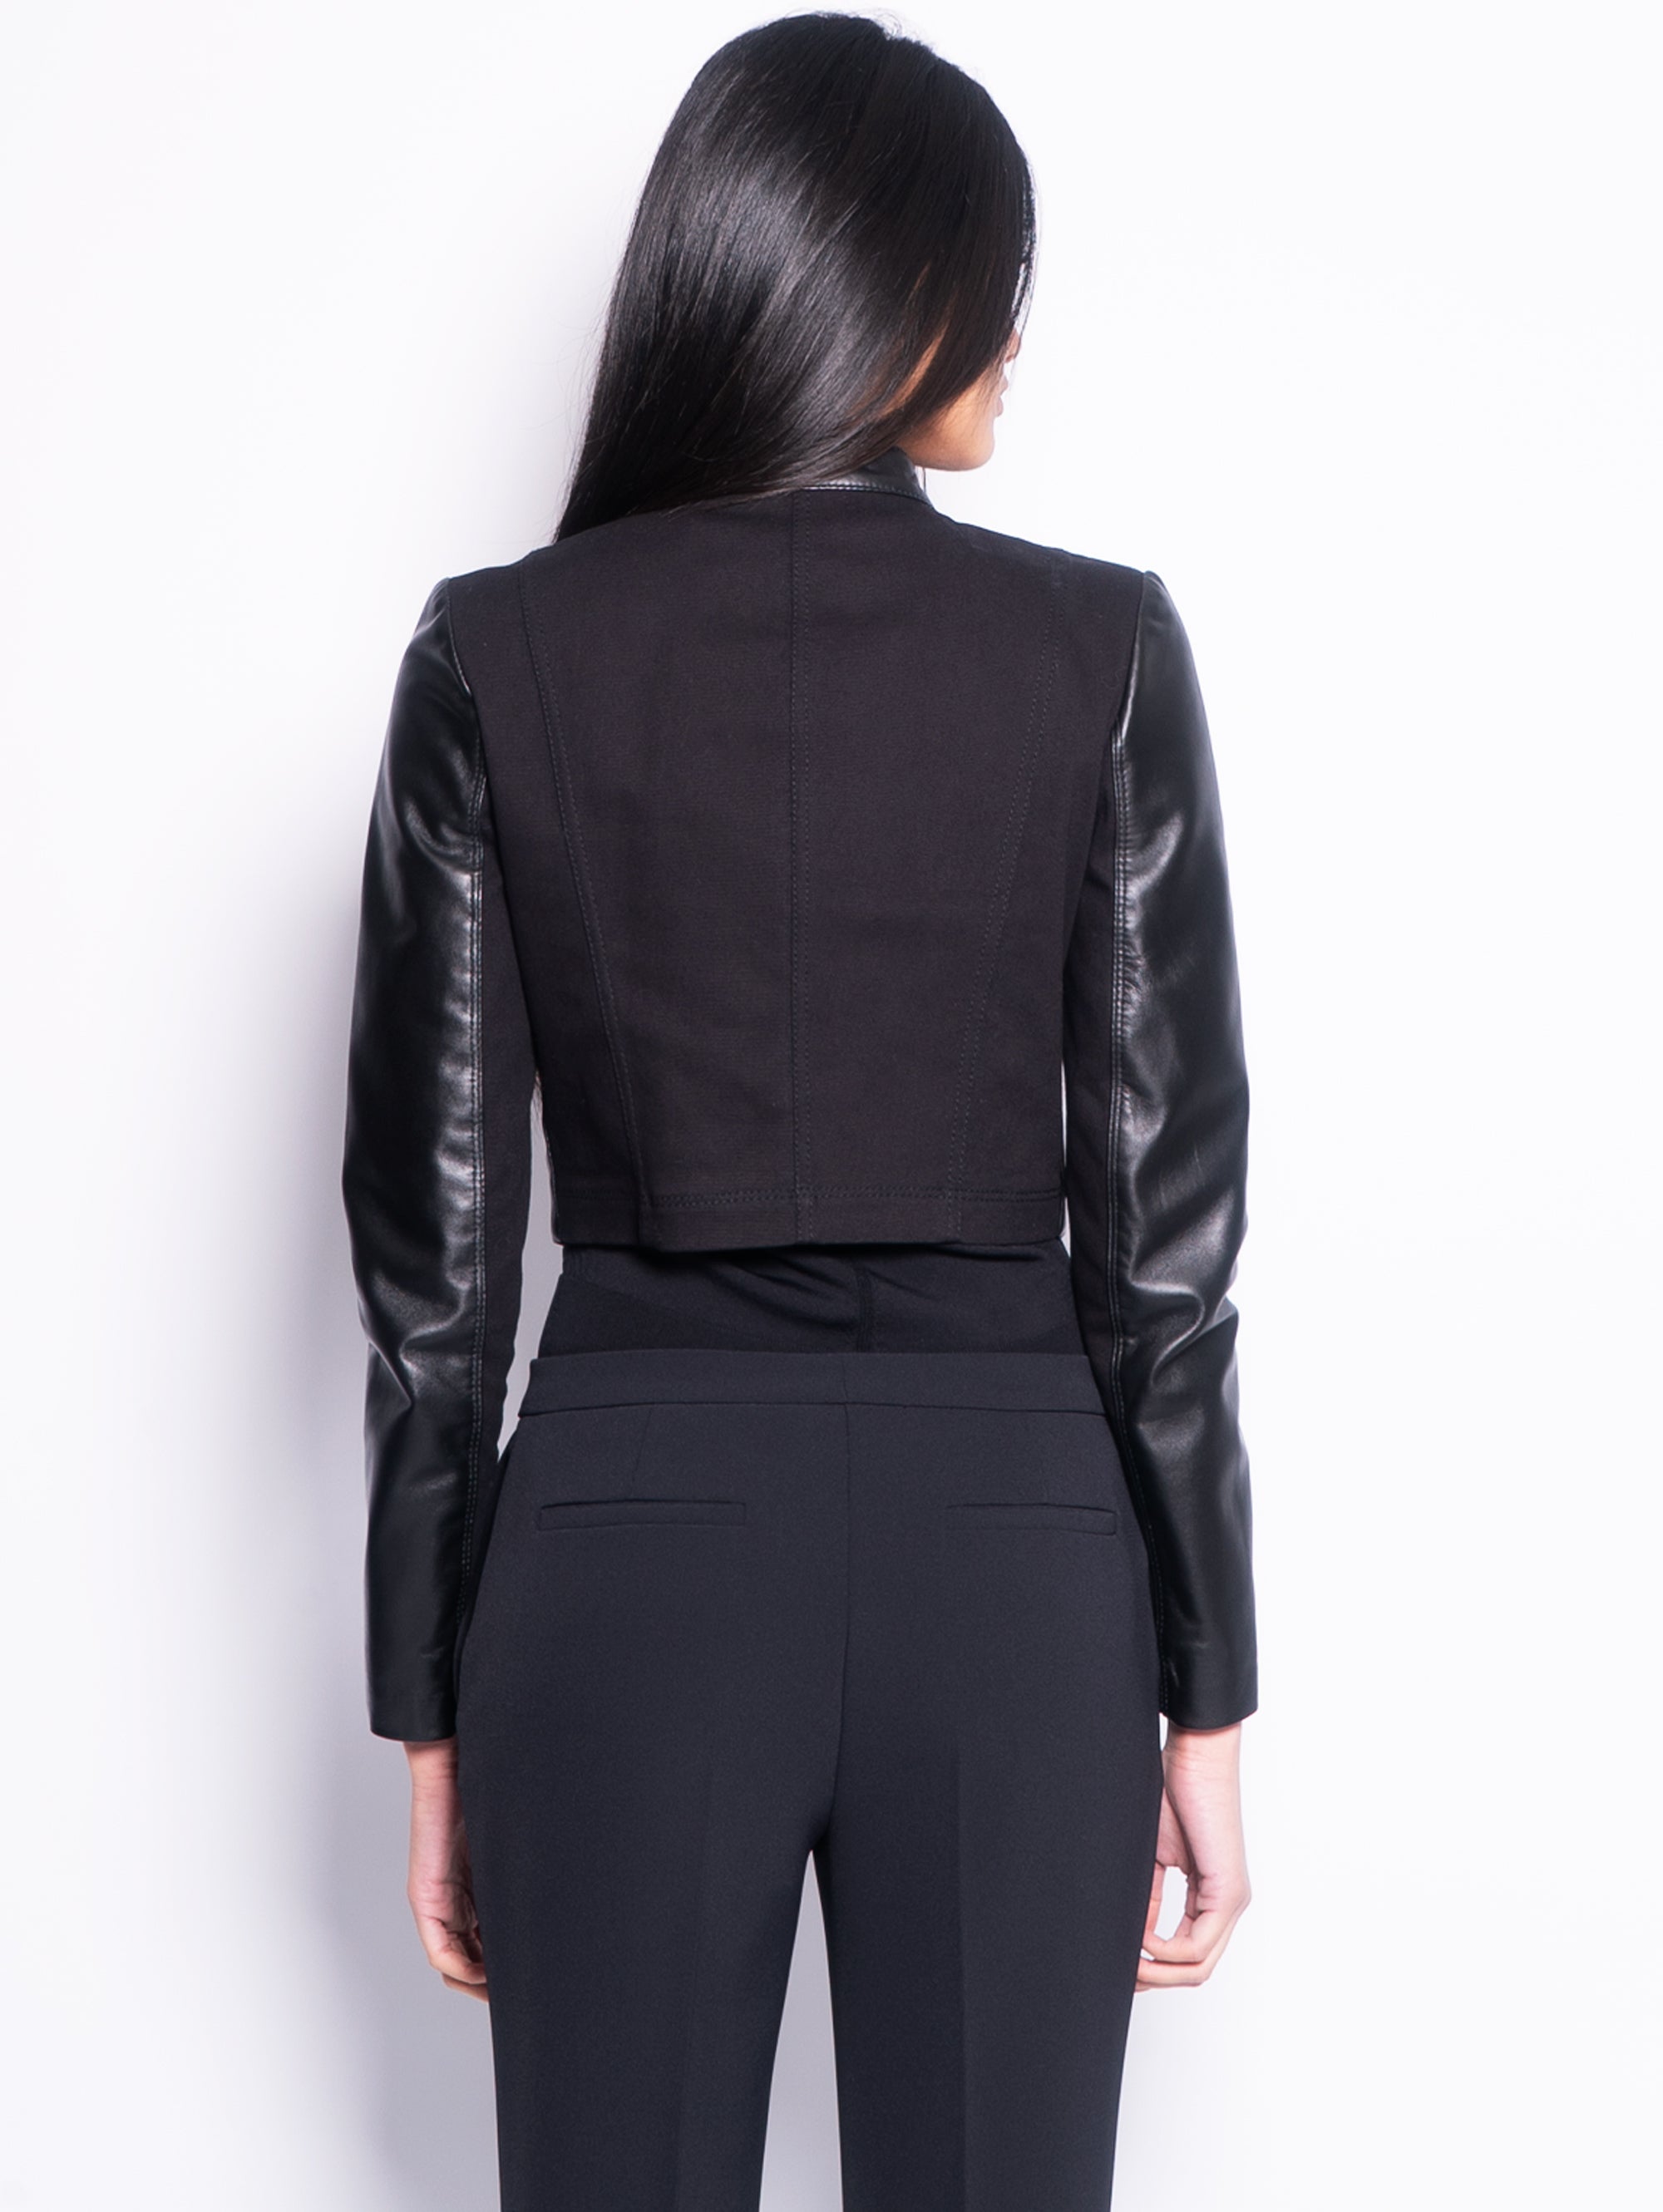 Short Biker Jacket in Black Leather and Fabric